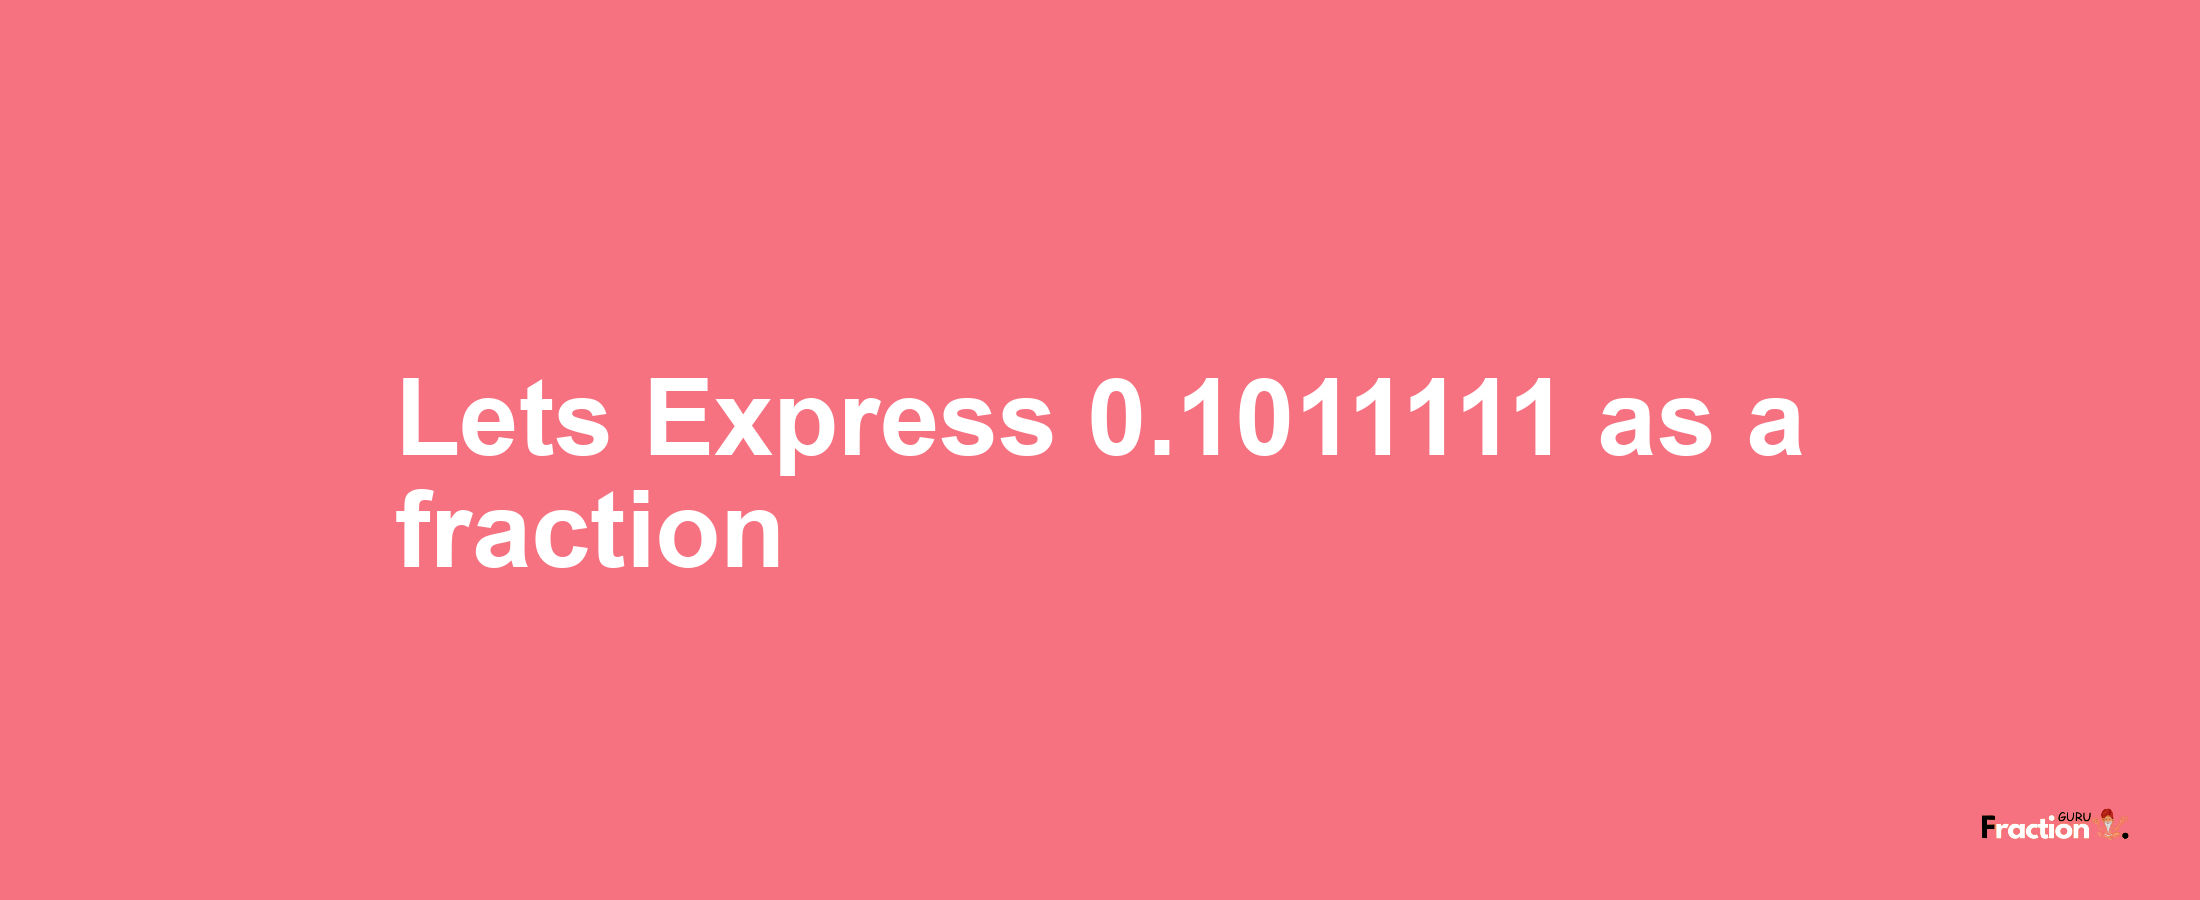 Lets Express 0.1011111 as afraction